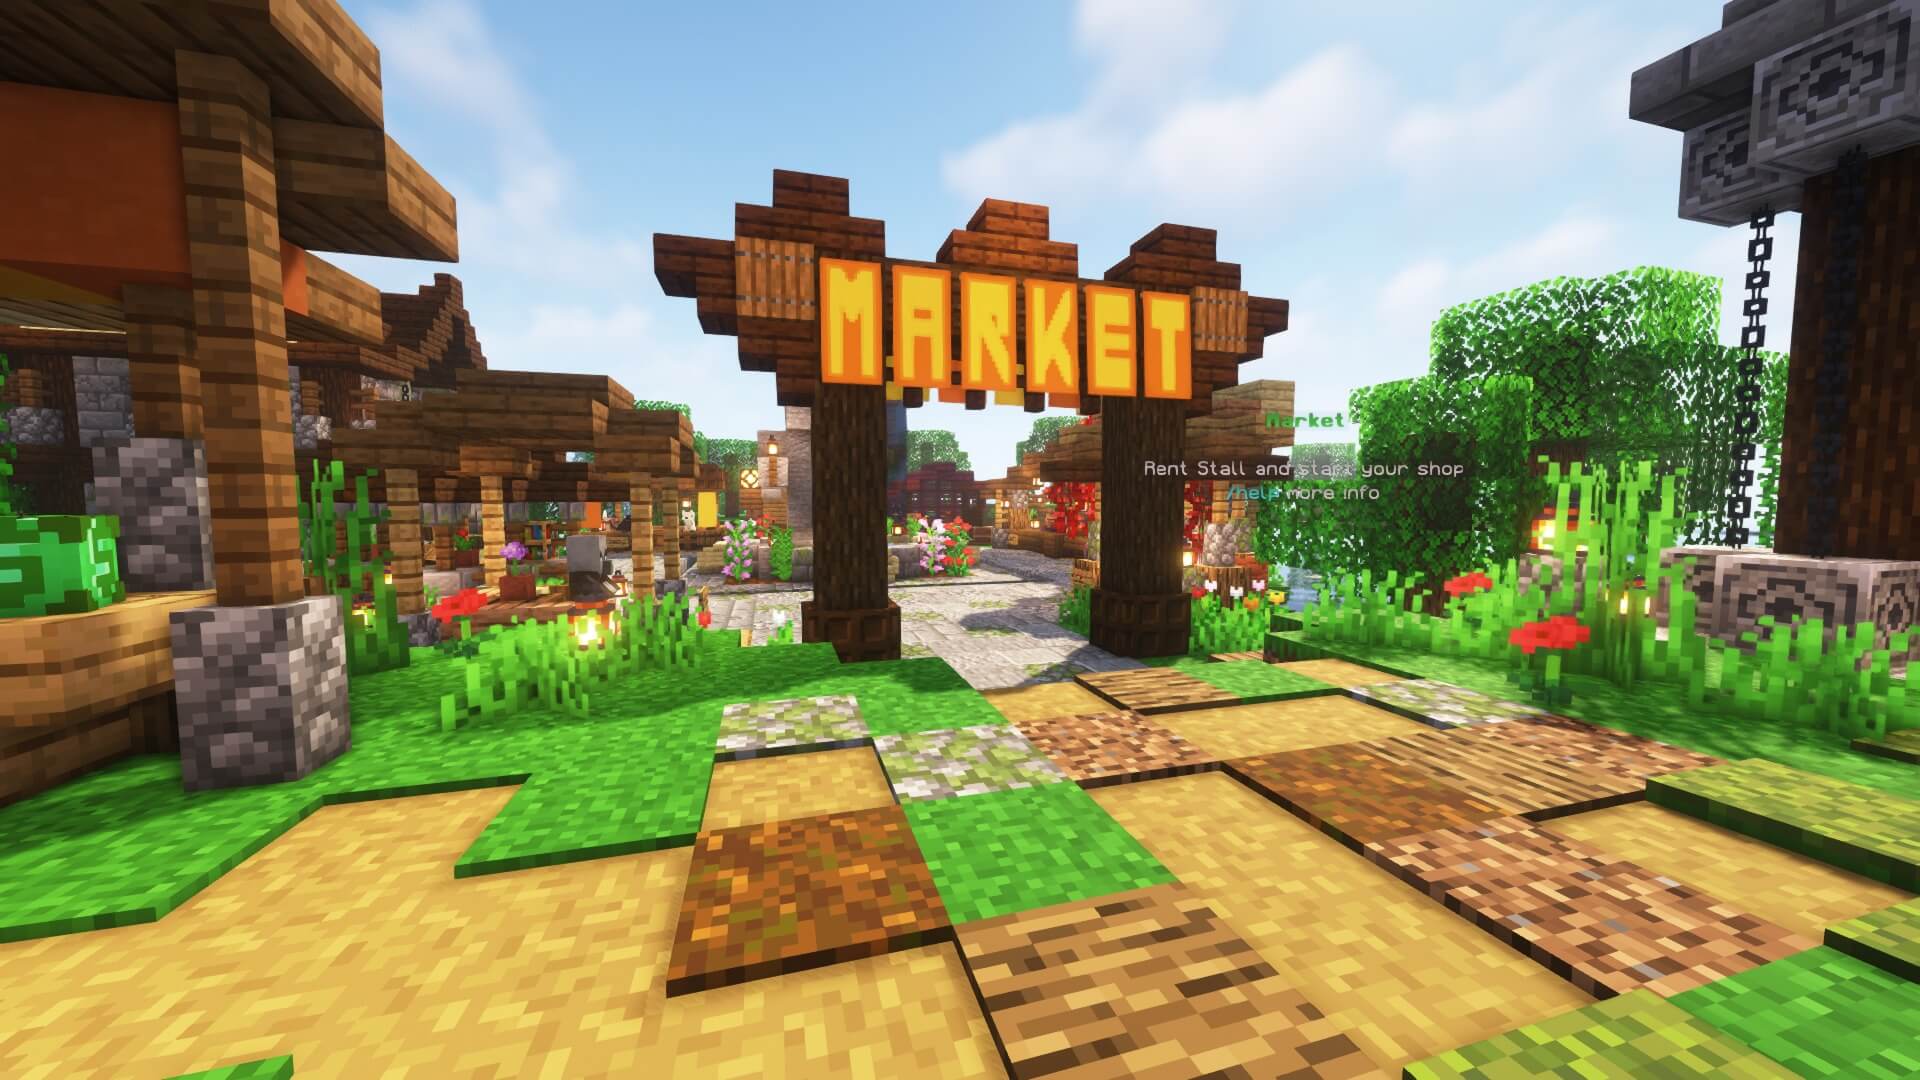 Read more about the article Economy Update: Introducing Player Shops, Player Auctions, and Jobs to the Survival Server